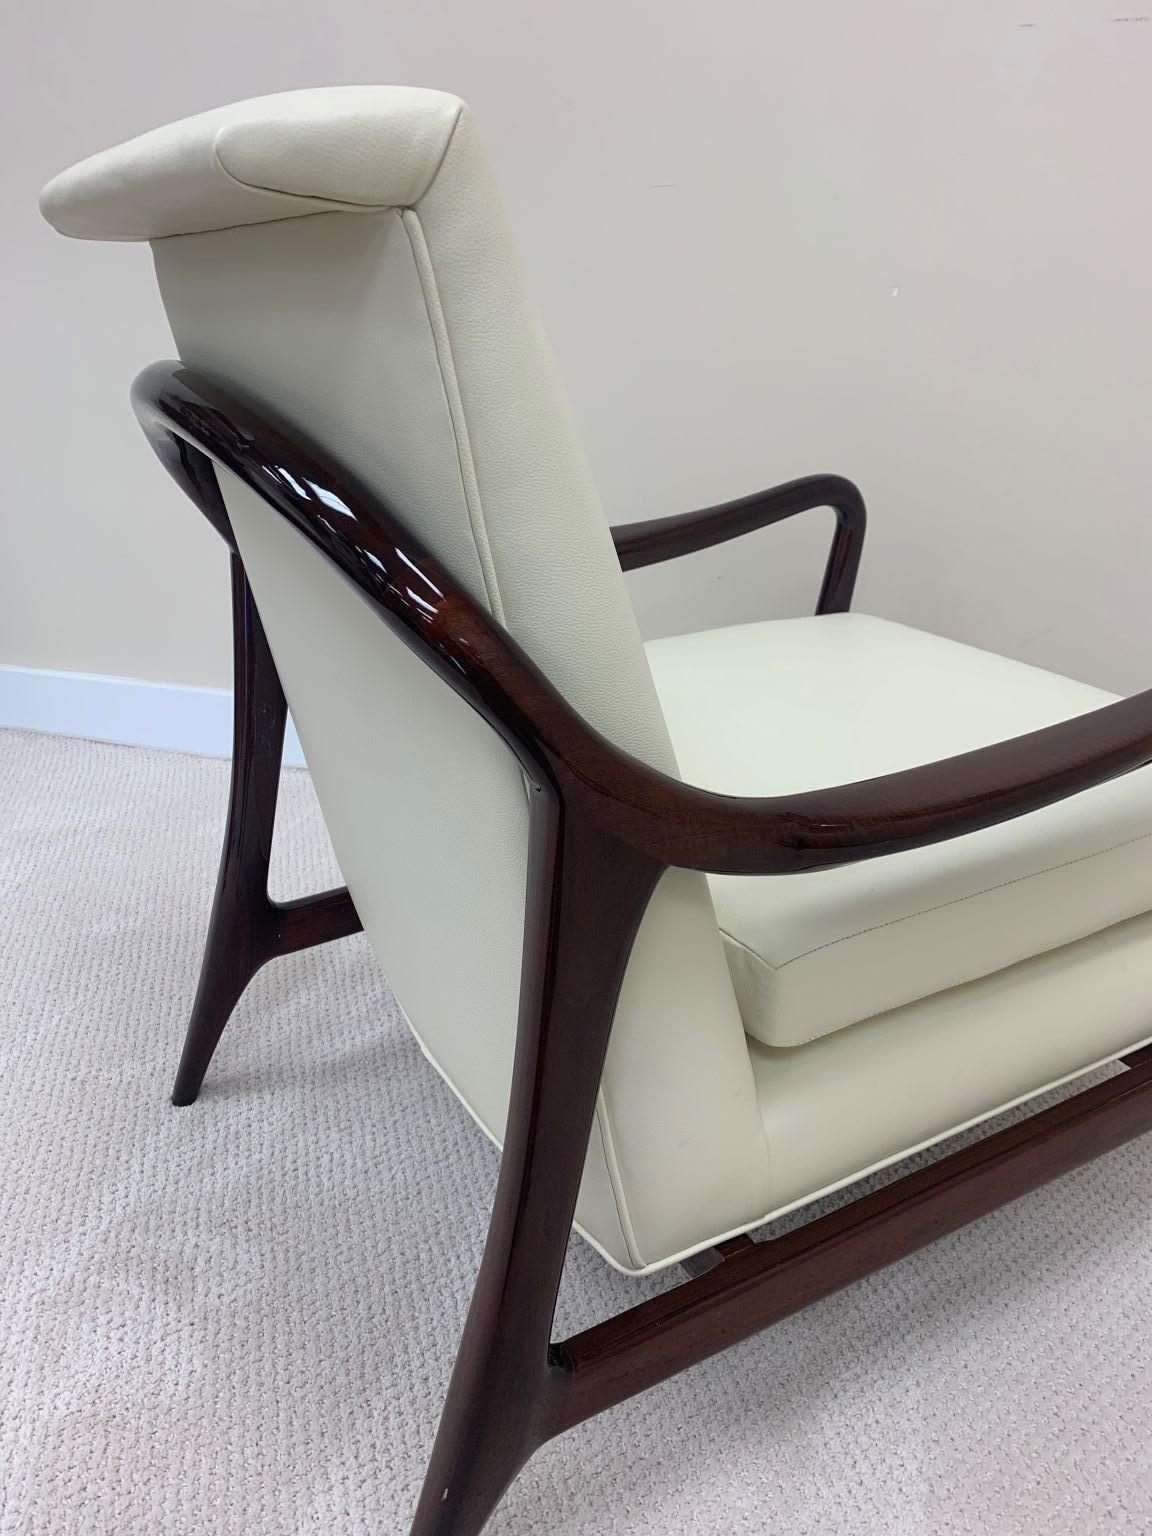 Pair of Sculptural Mid-Century Kagan Style Walnut and Leather Lounge Chairs 1